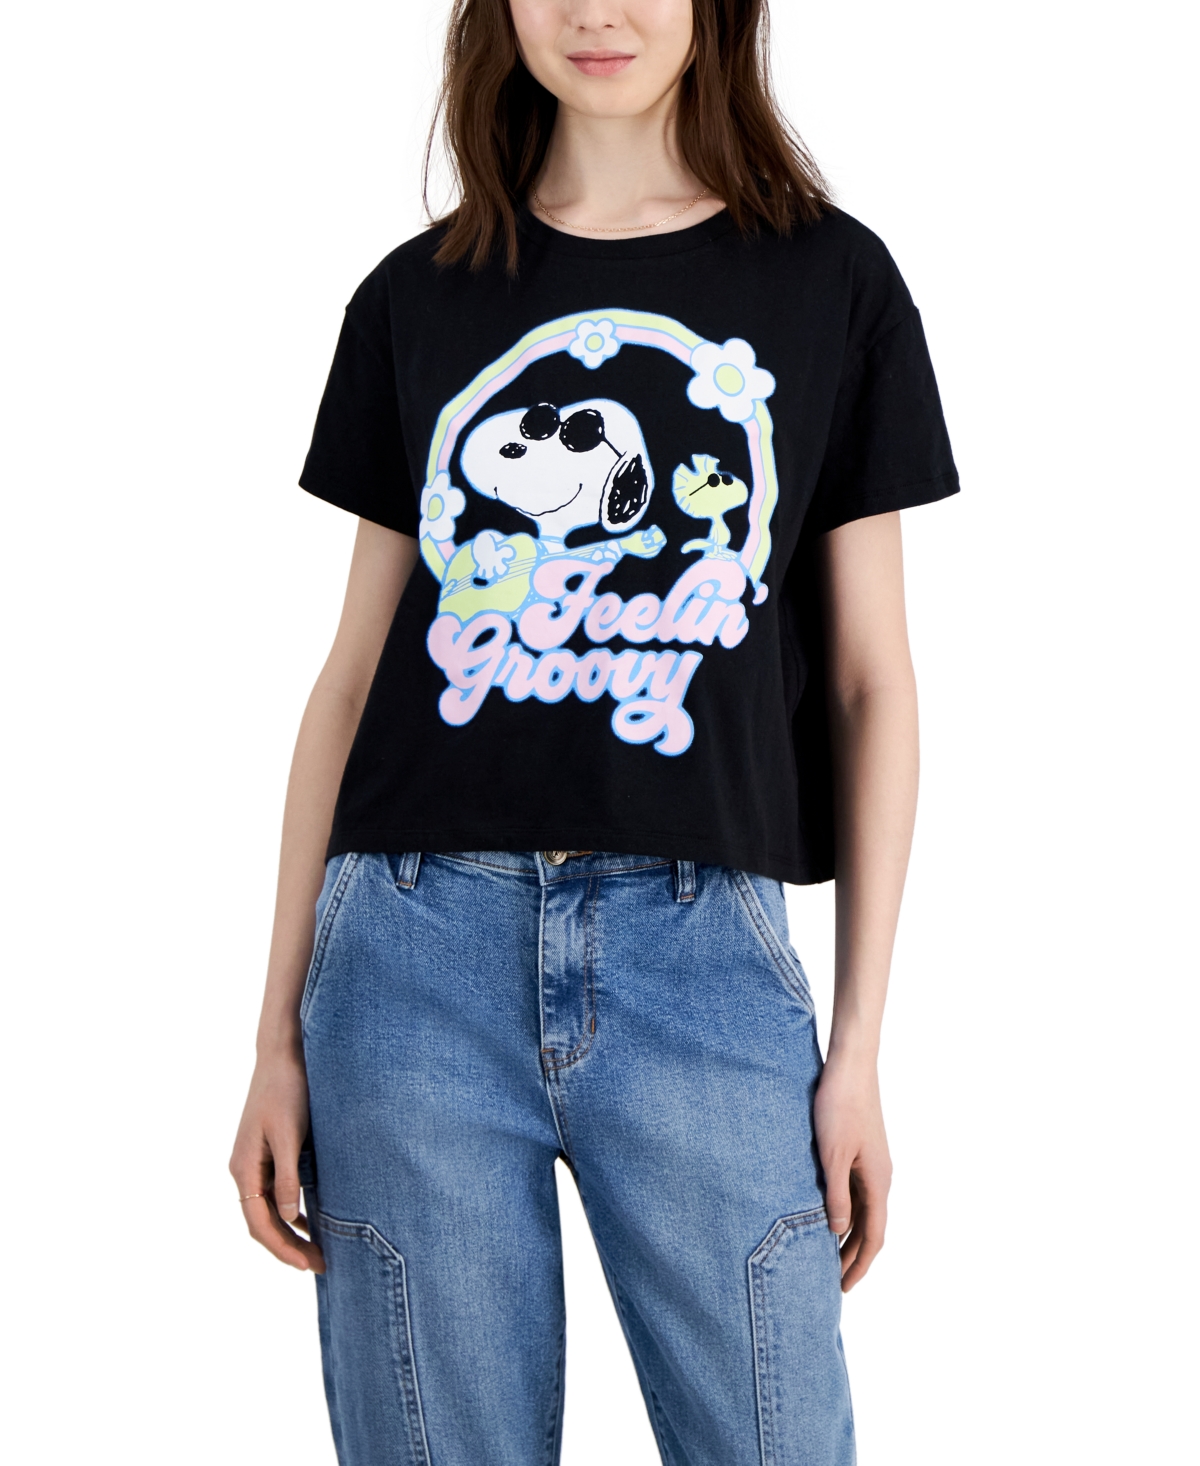 Grayson Threads, The Label Juniors' Cotton Snoopy Crewneck Tee In Black